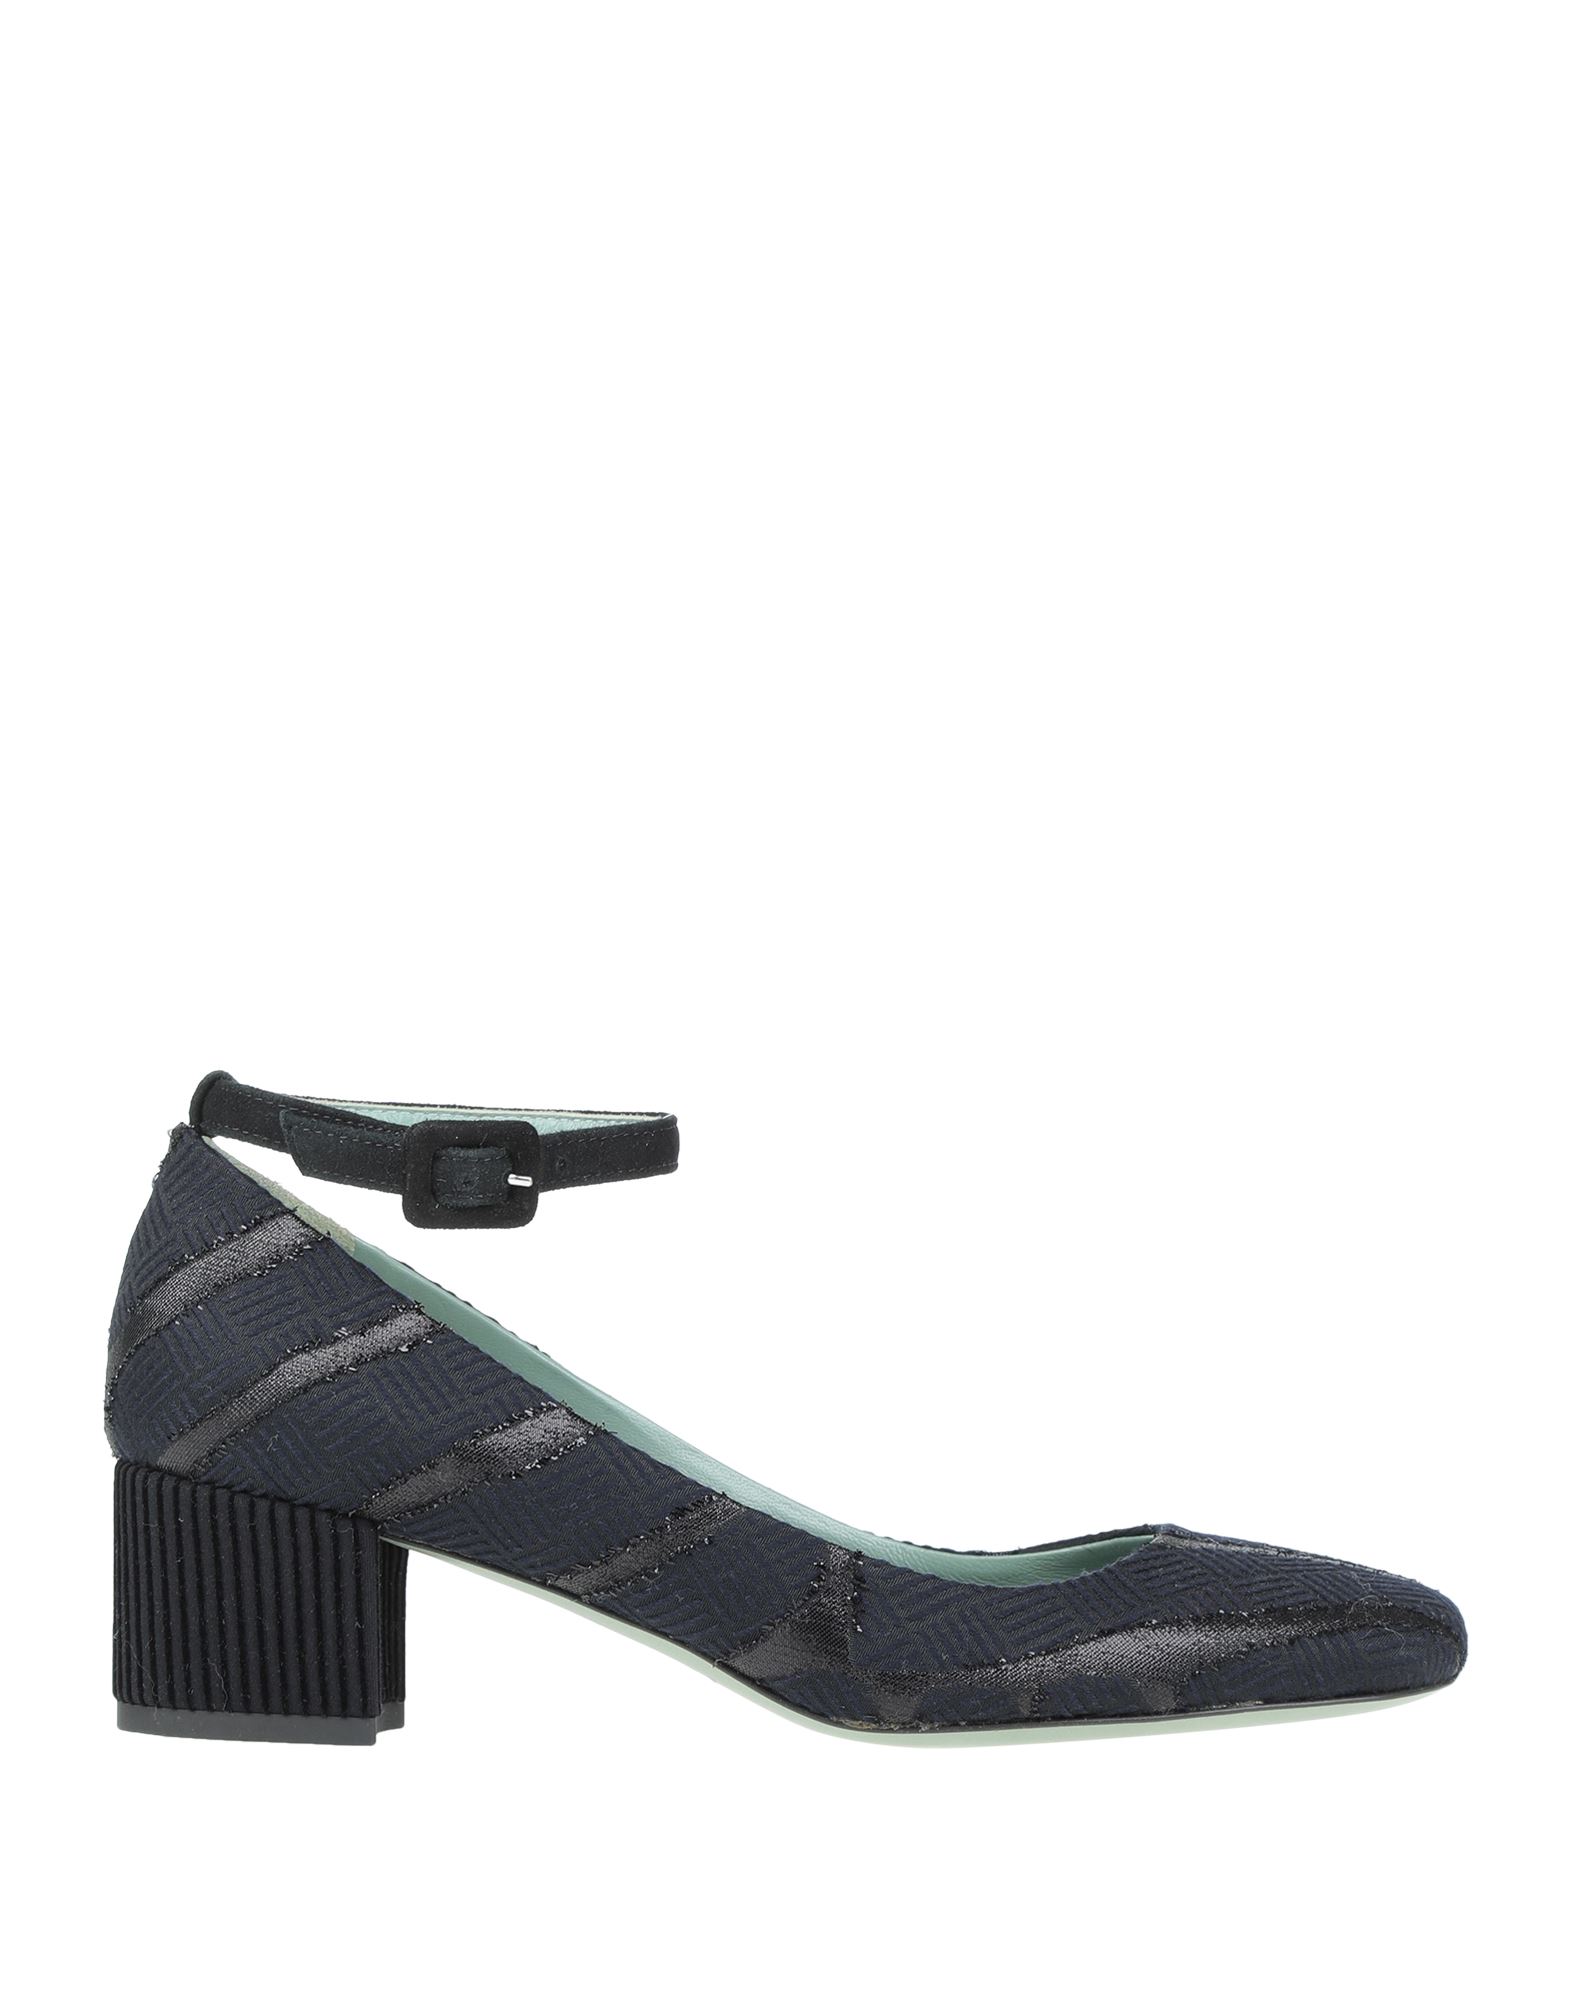 Paola D'arcano Pumps In Black